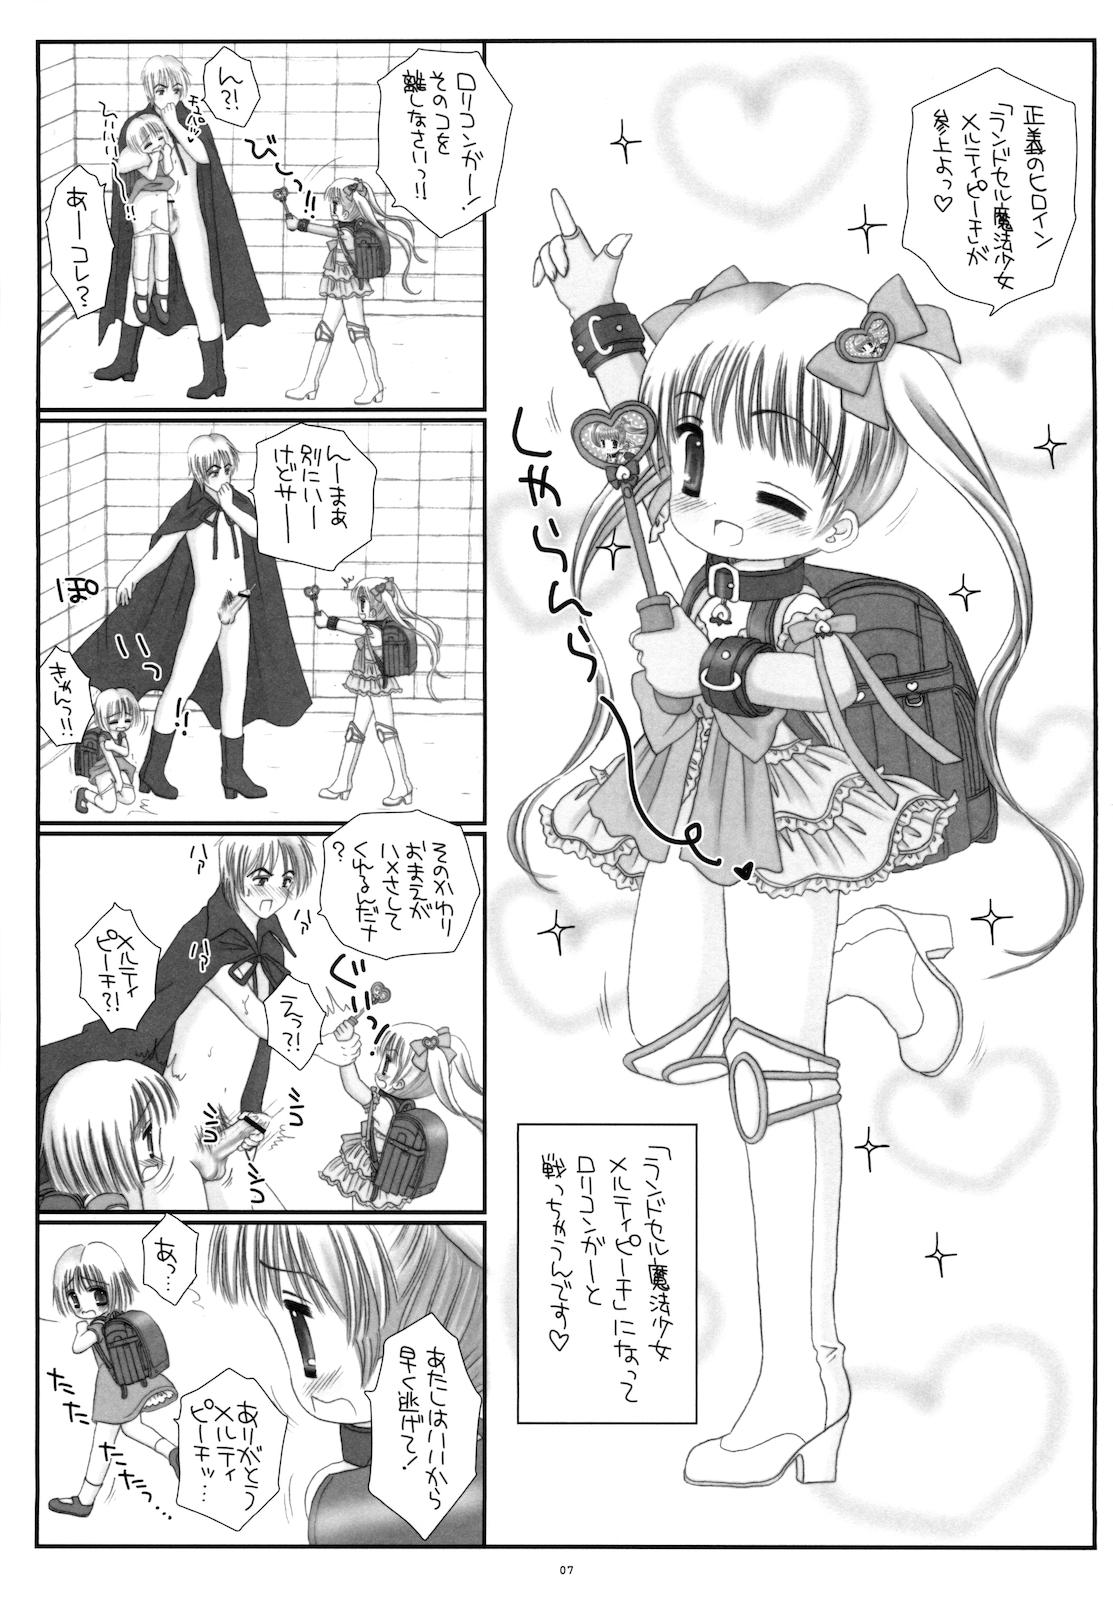 Best Blow Jobs Ever Round Shell Mahou Shoujo Melty Peach Price - Page 9